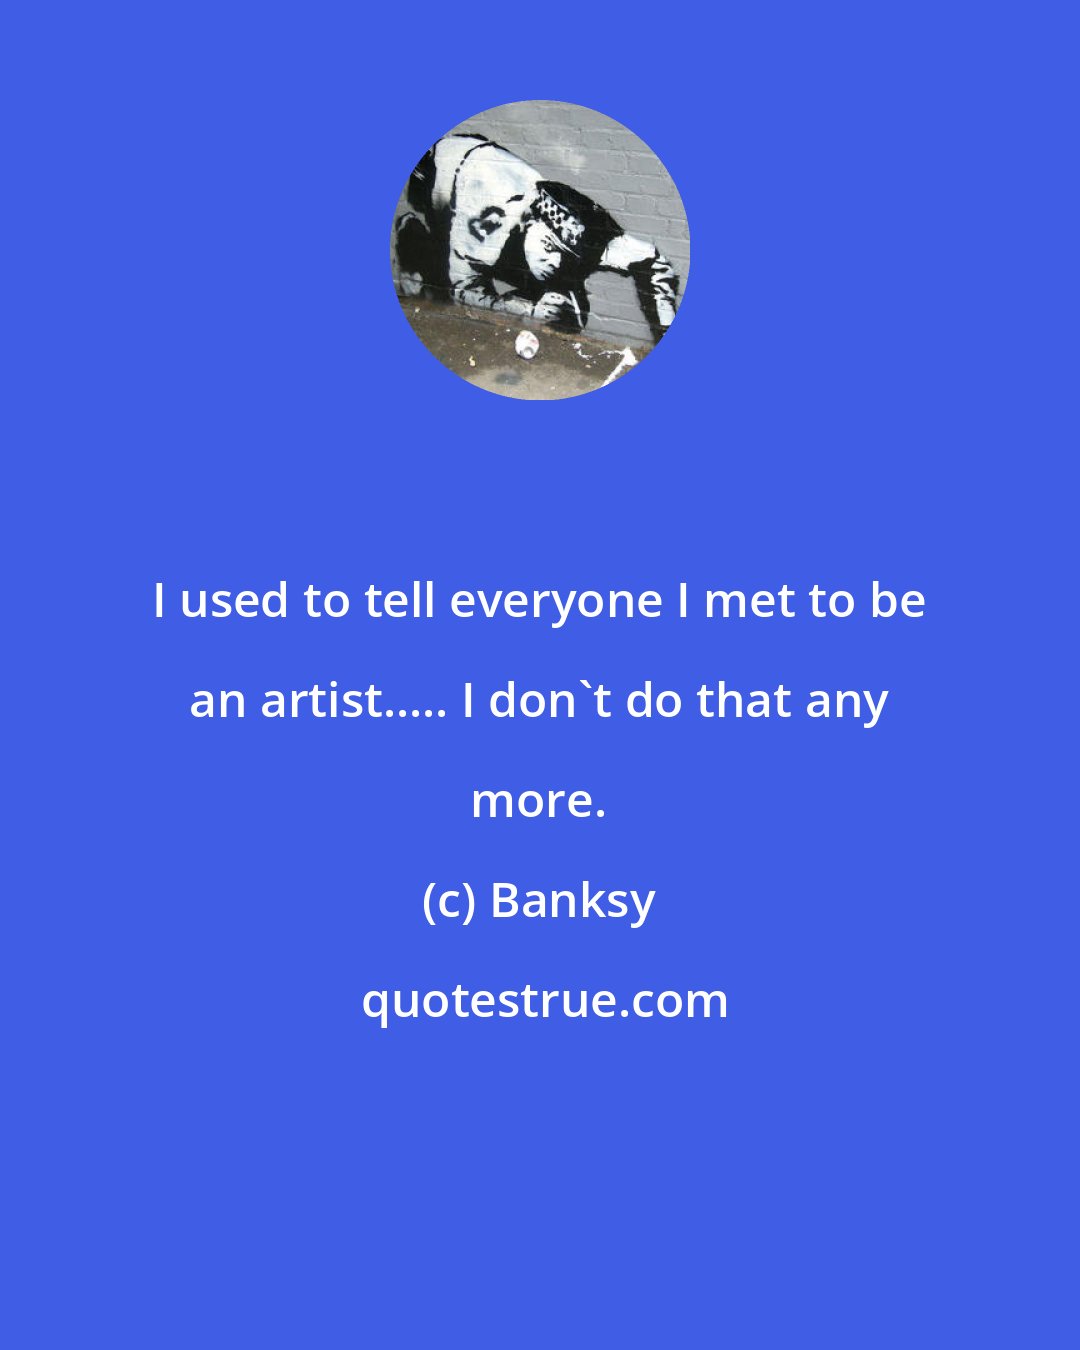 Banksy: I used to tell everyone I met to be an artist..... I don't do that any more.